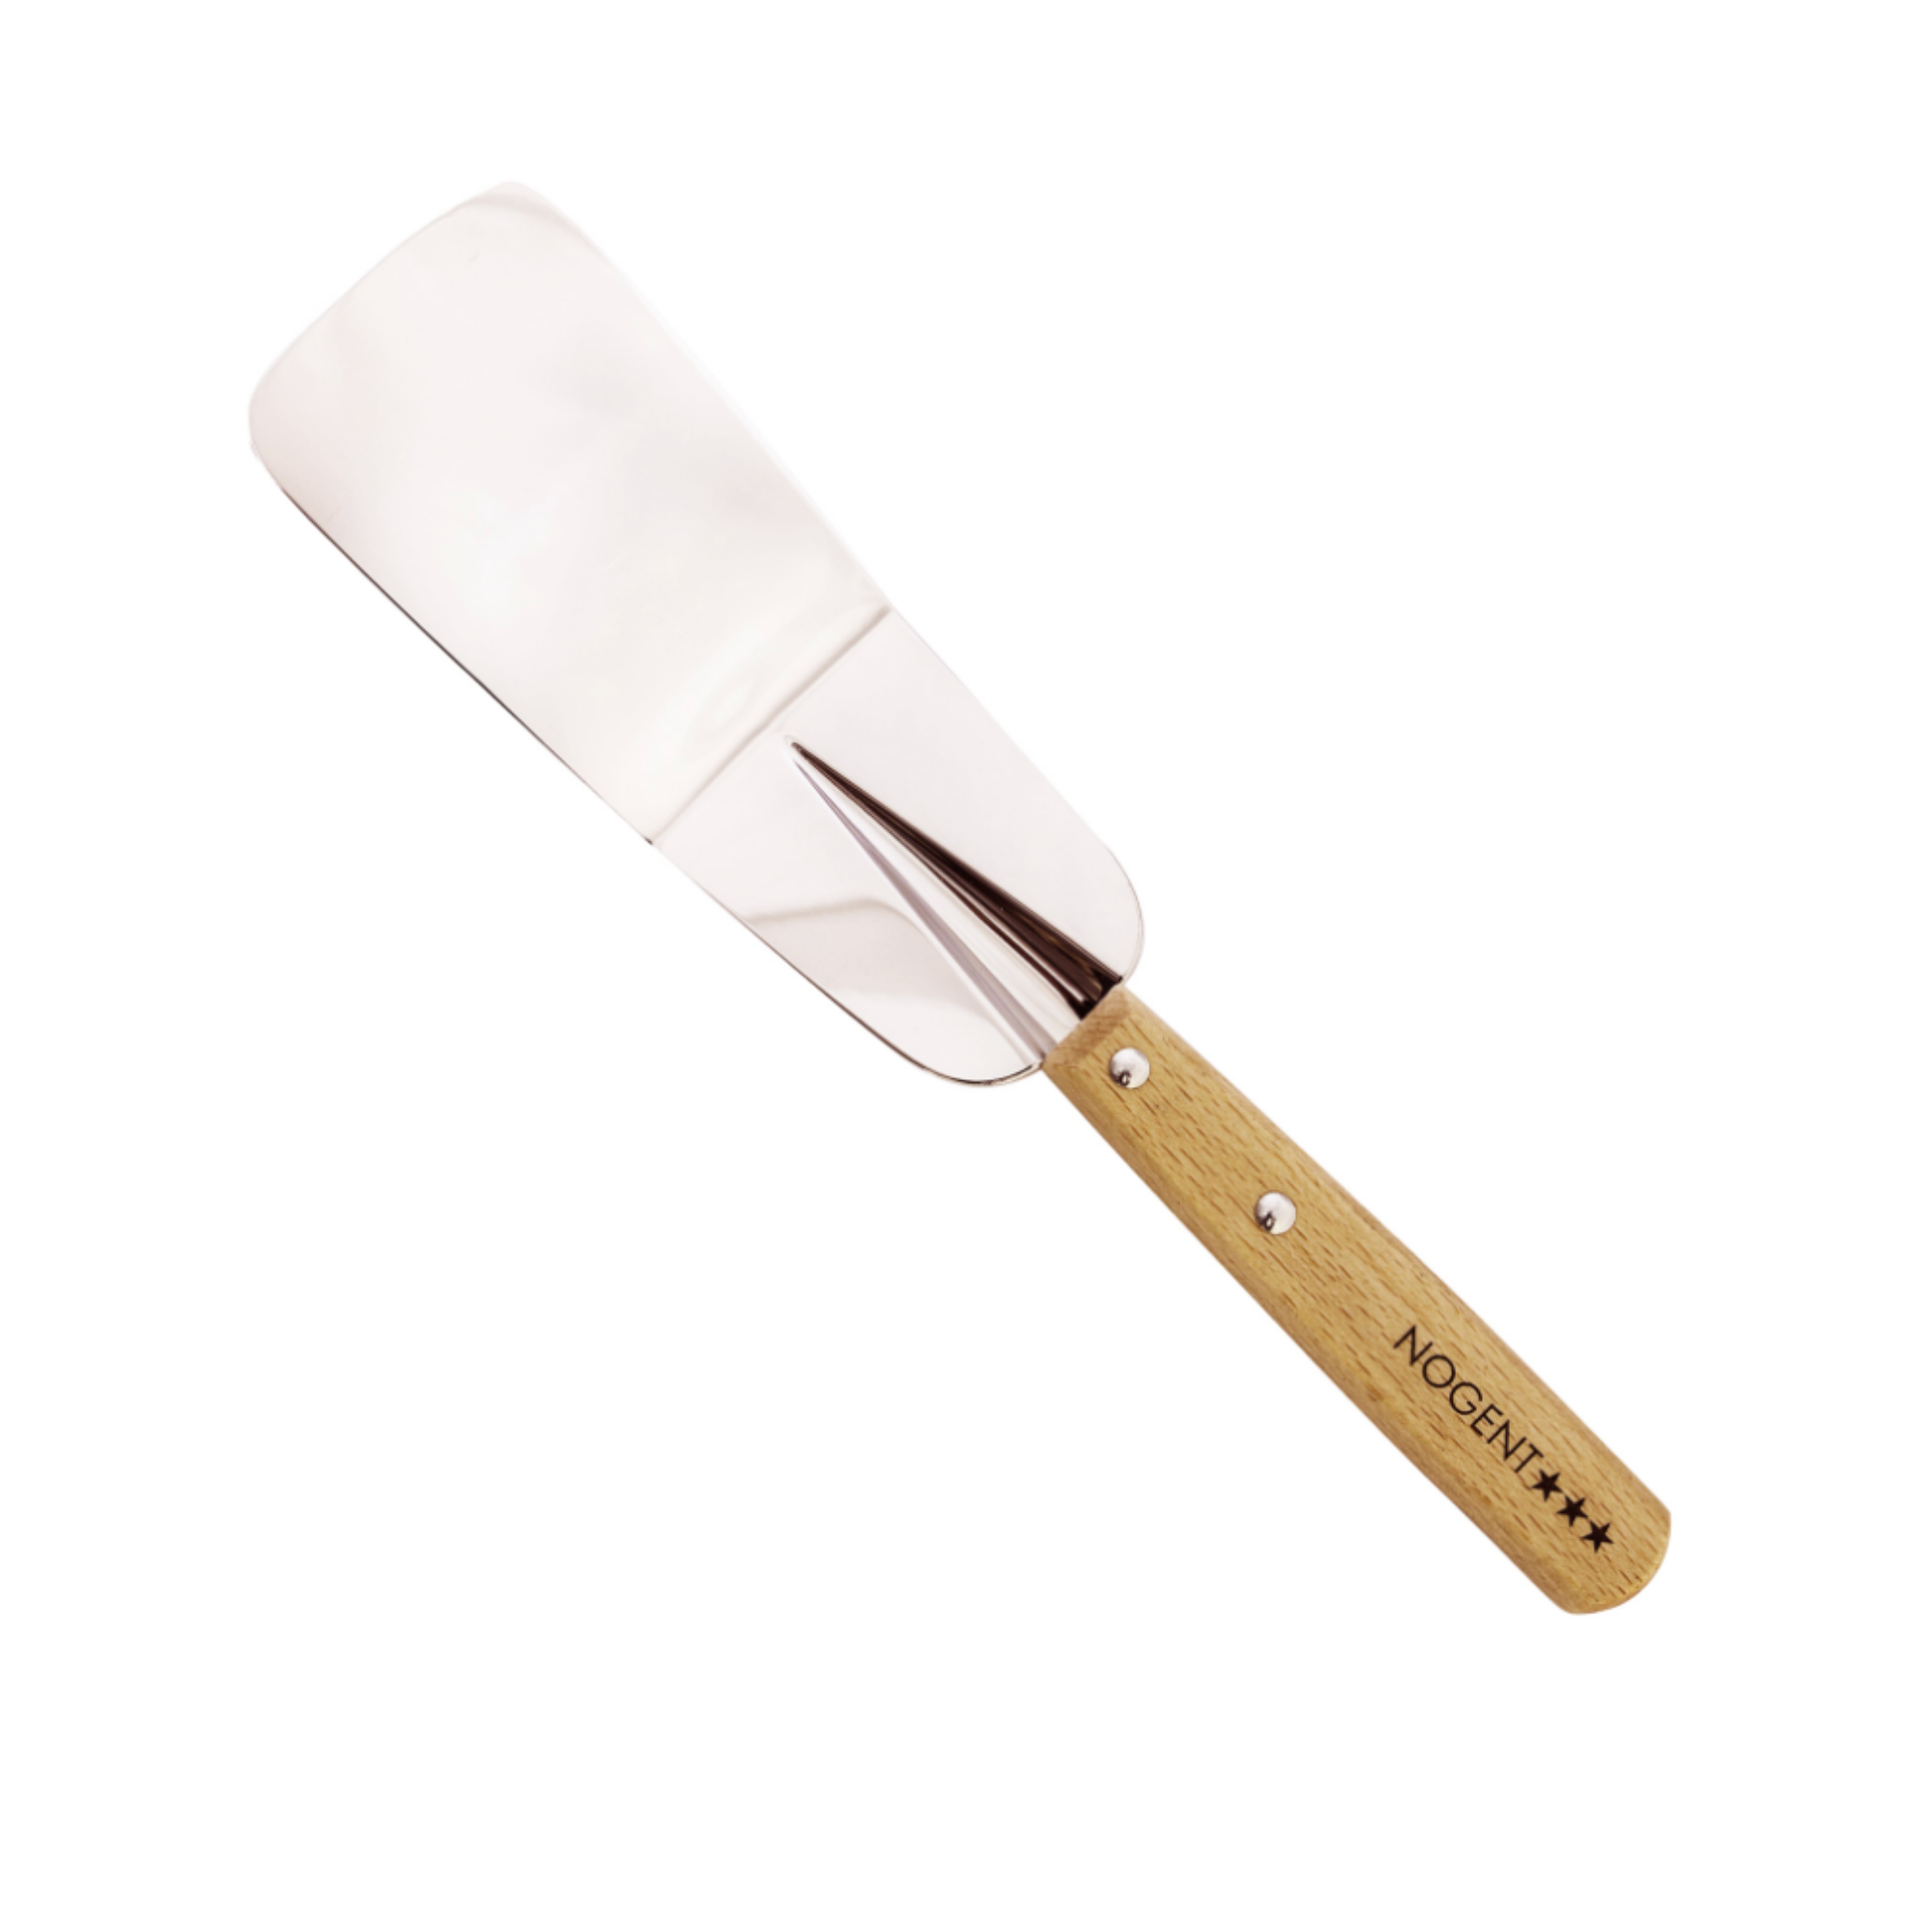 Nogent Canada Service Spatula Made in France - Clementine Boutique